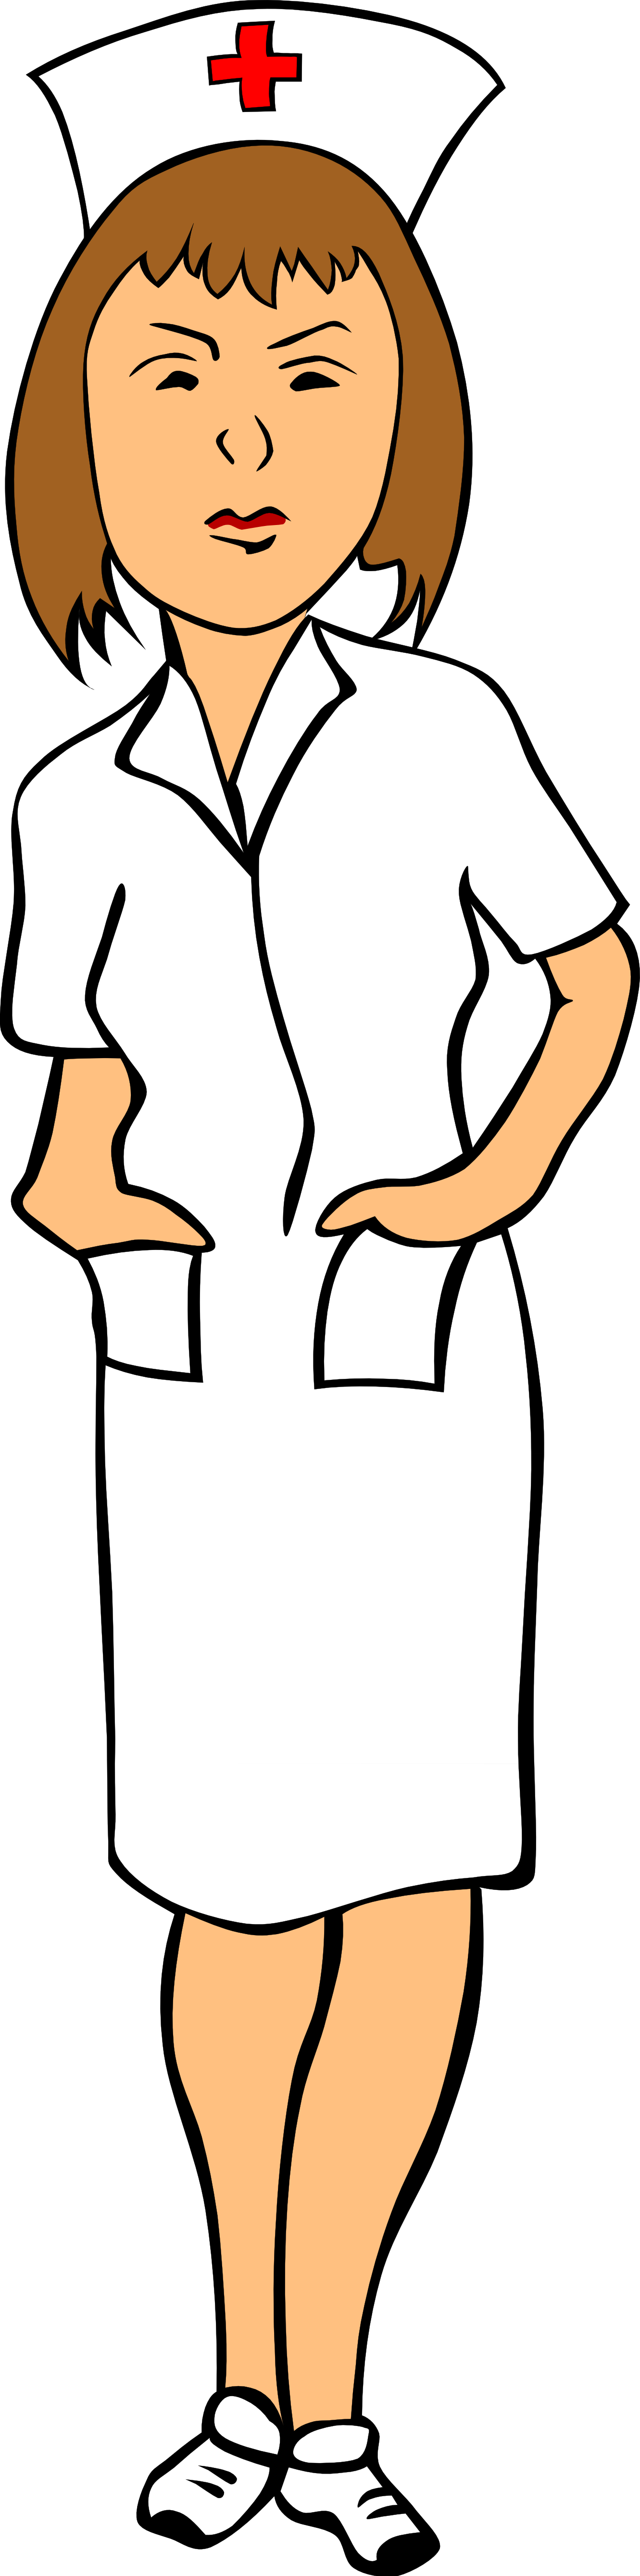 Clipart library student library.  collection of nurse